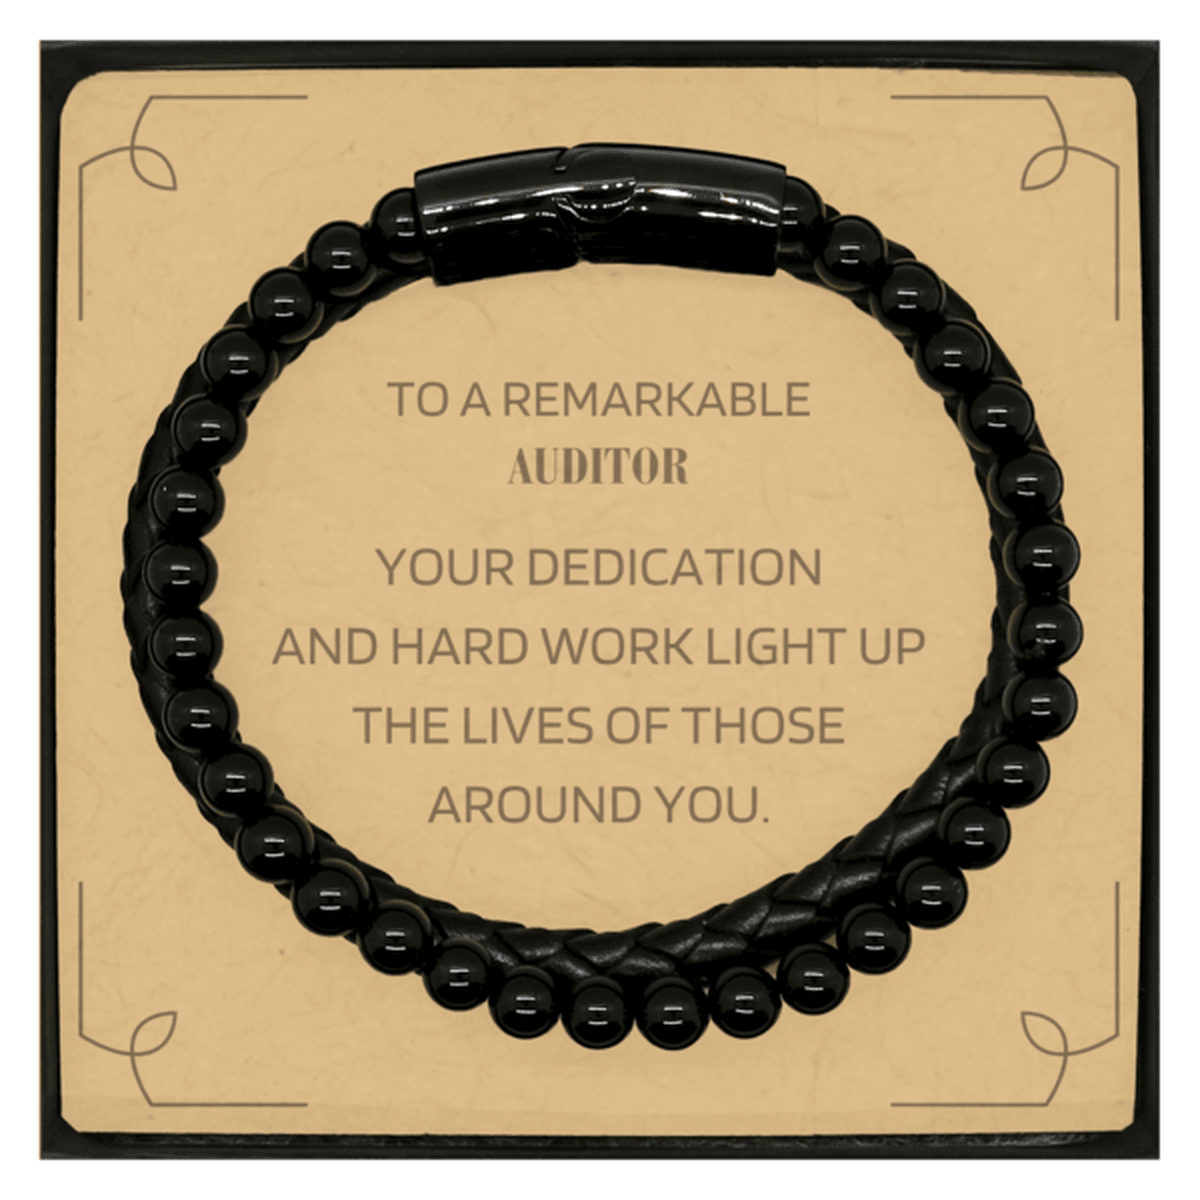 Remarkable Auditor Gifts, Your dedication and hard work, Inspirational Birthday Christmas Unique Stone Leather Bracelets For Auditor, Coworkers, Men, Women, Friends - Mallard Moon Gift Shop